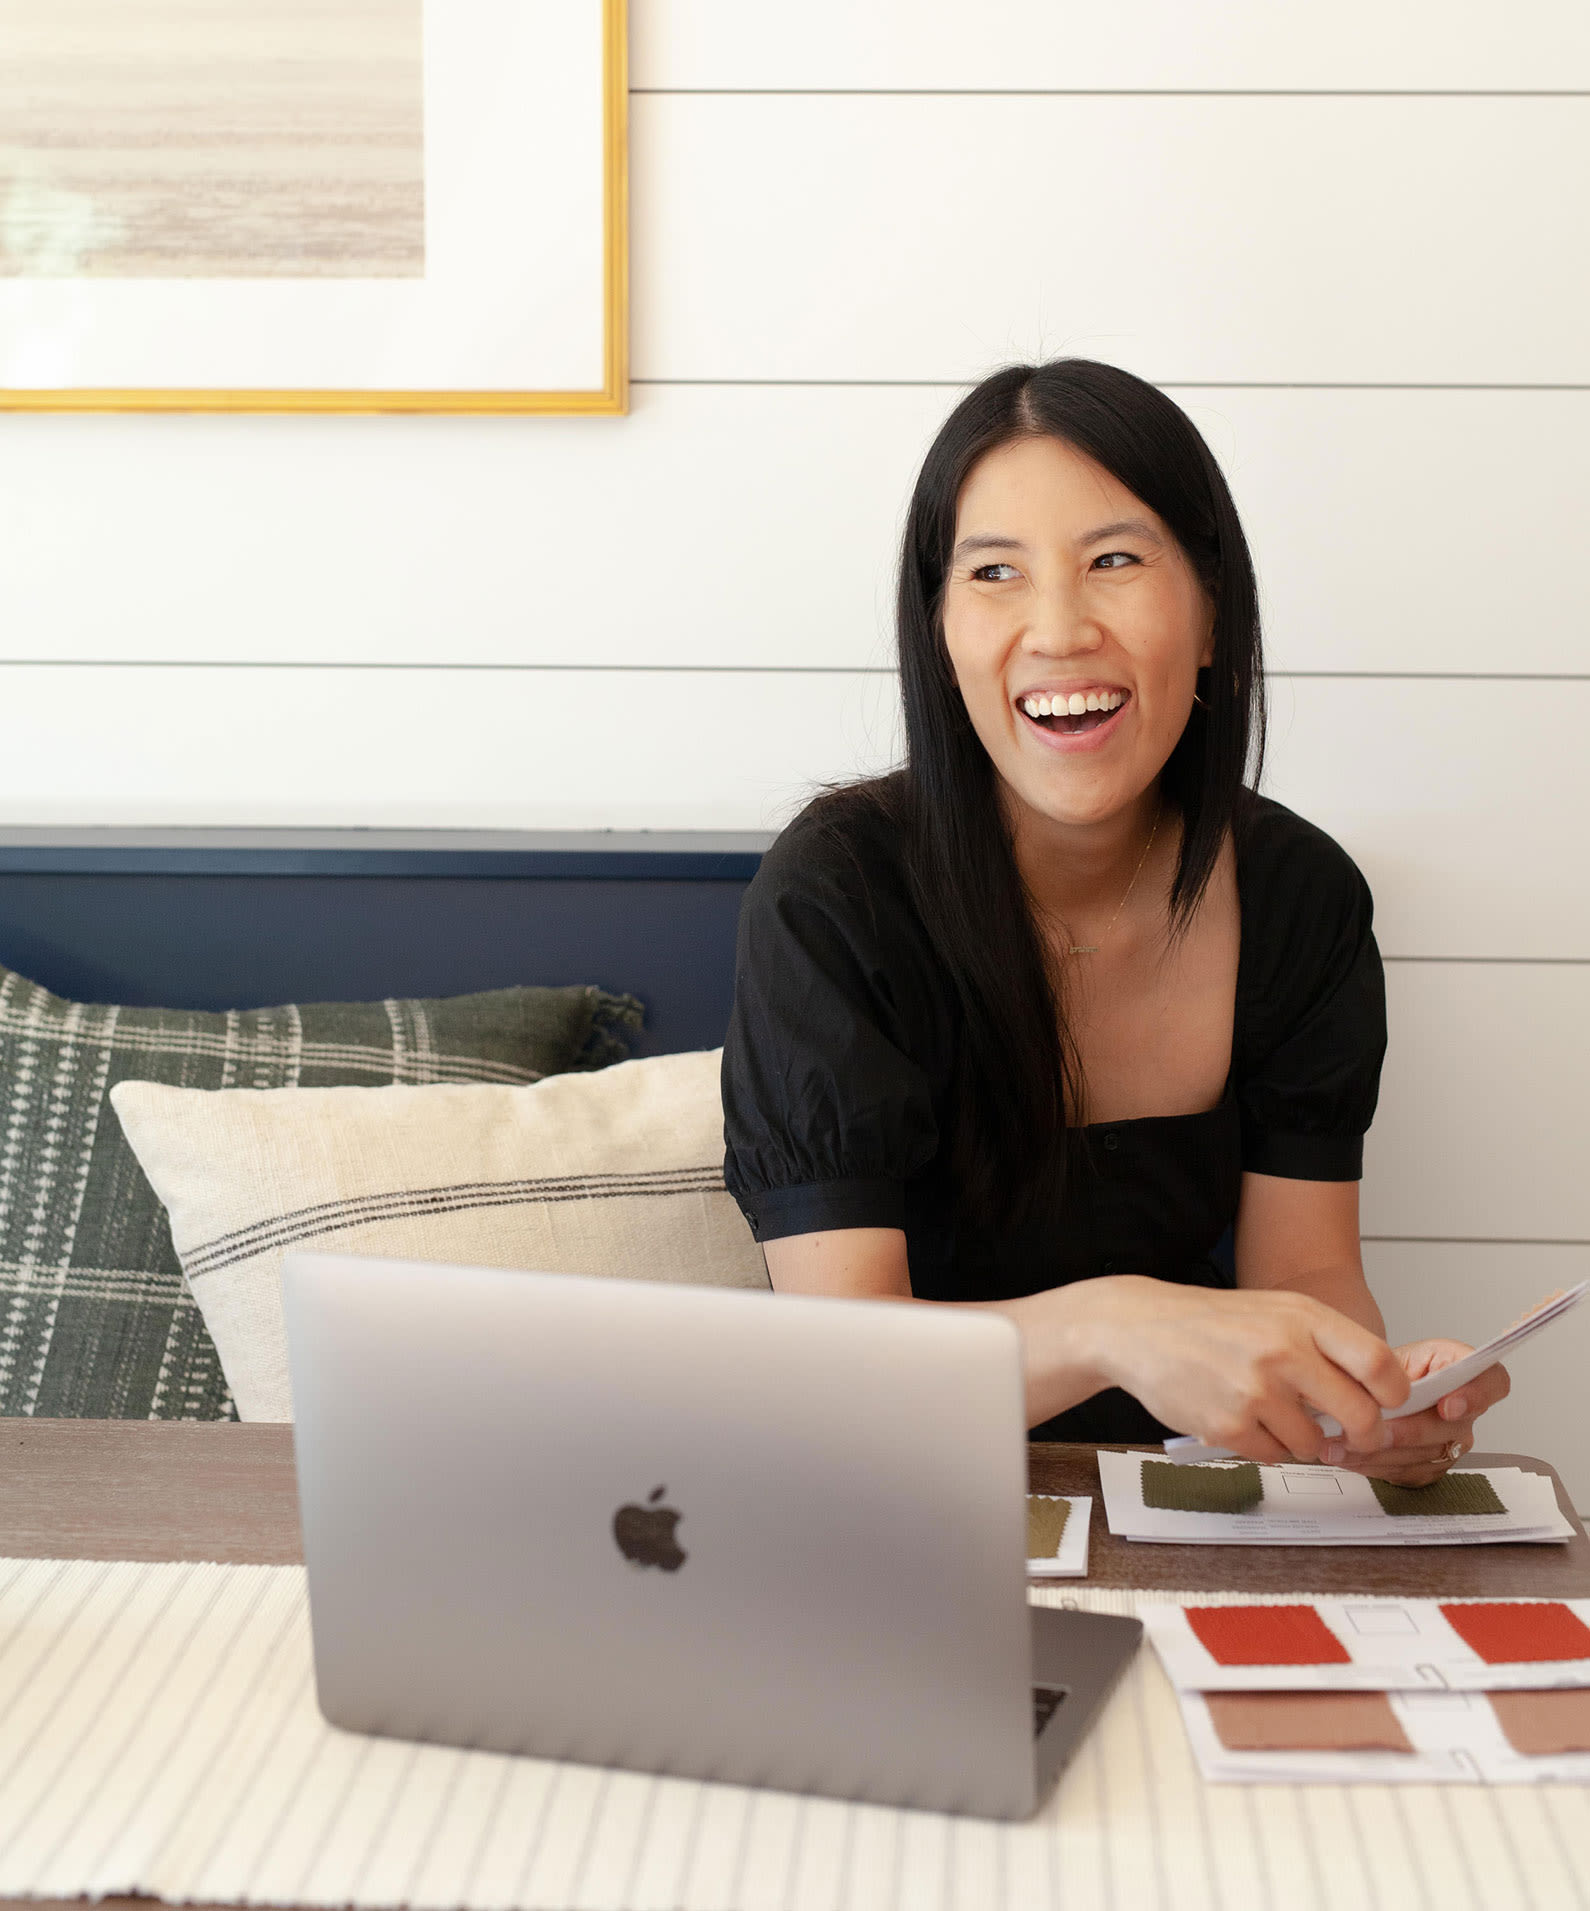 Justine Liu at her desk with a laptop and fabric swatches.